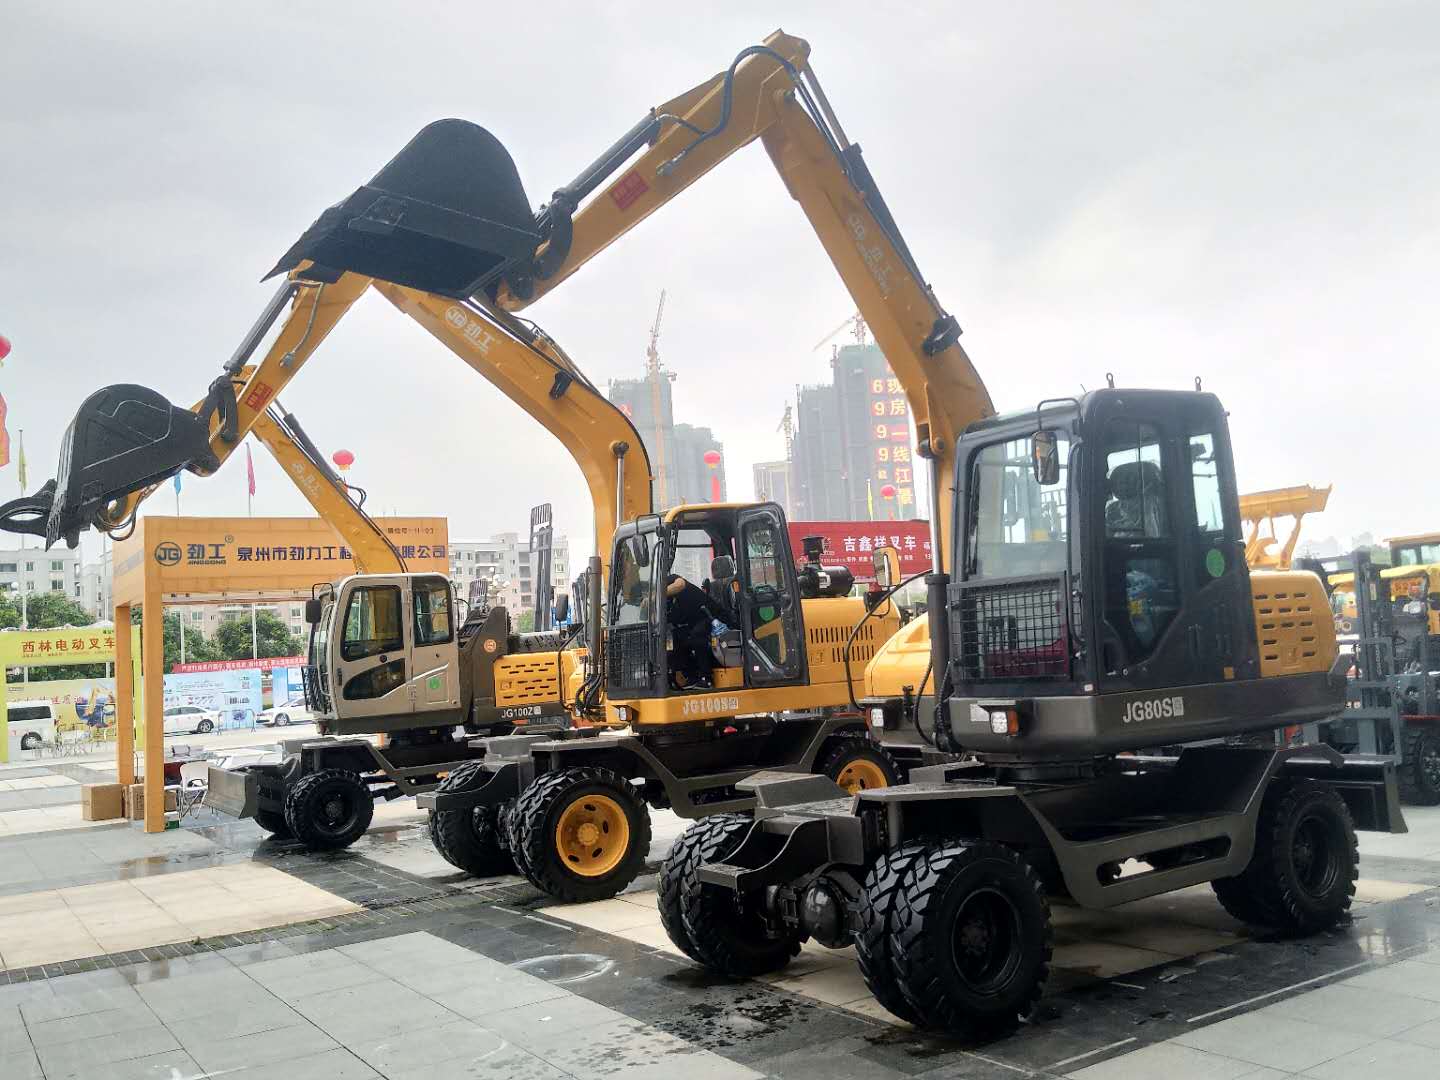 Jing Gong 100S and 80S wheel excavator